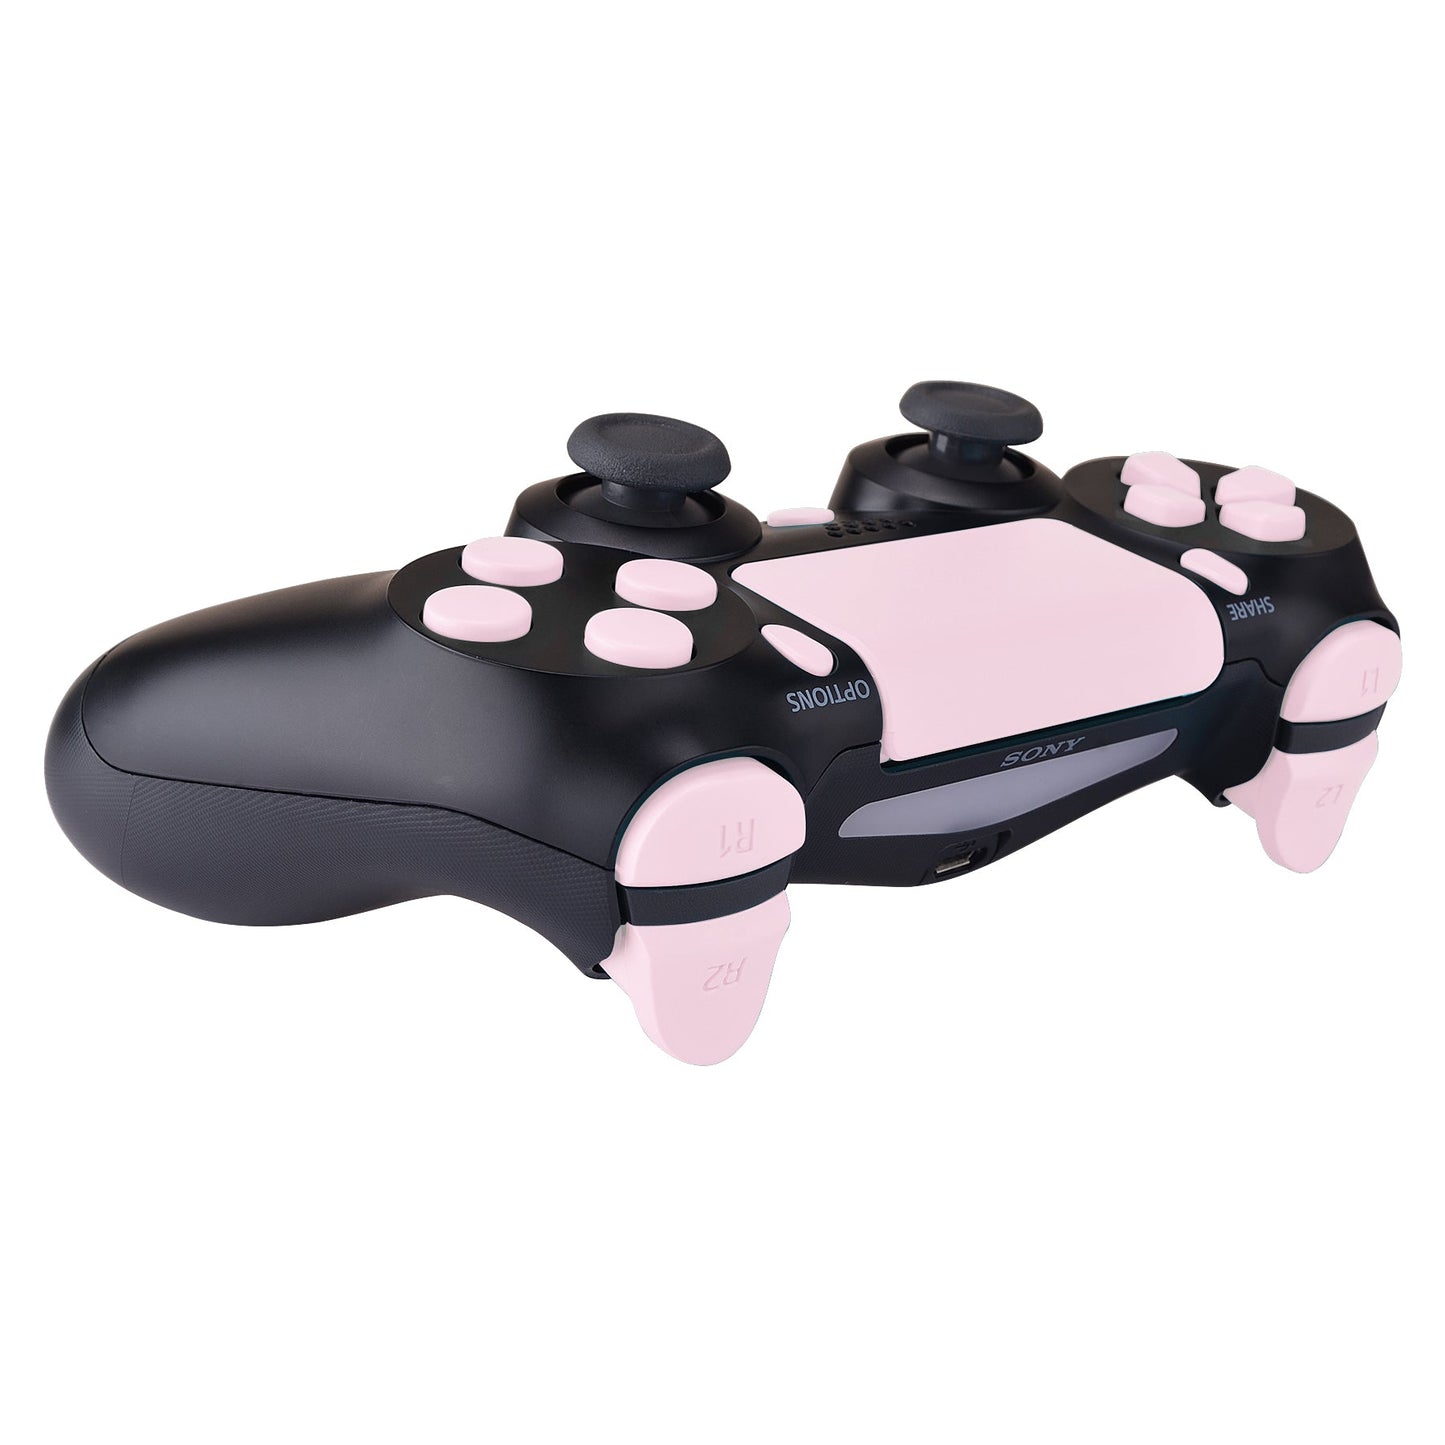 eXtremeRate Replacement D-pad R1 L1 Buttons Pro Controller Action ps4 for for Touchpad Repair Full Cherry Share Triggers eXtremeRate L2 Kit Slim ps4 – Controller, Blossoms Set Options Home Buttons Pink R2